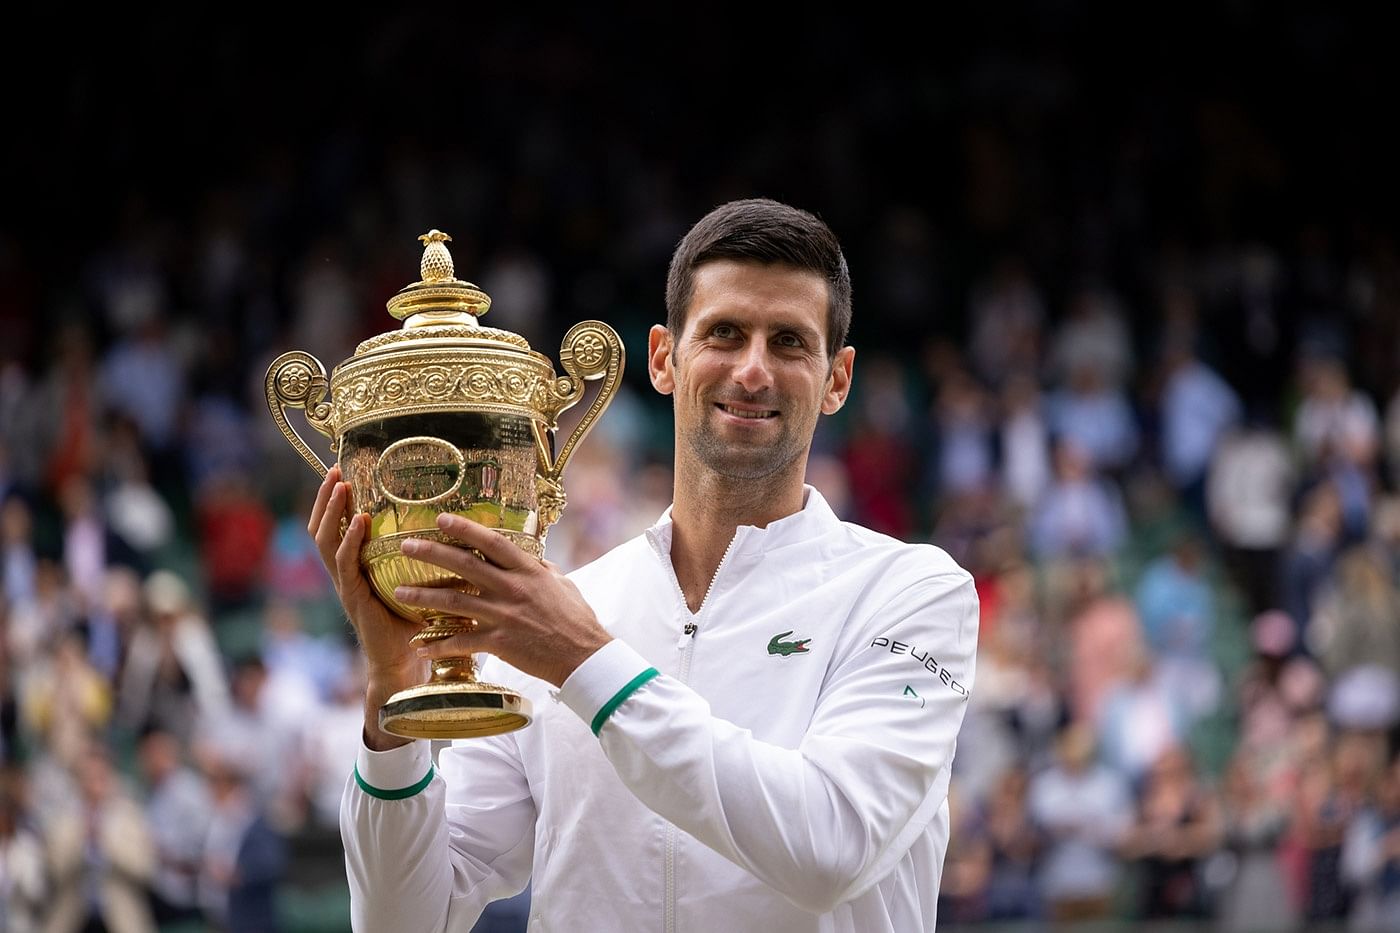 Wimbledon 2022 Date, Seeds, and How To Watch Live Stream and Telecast in India